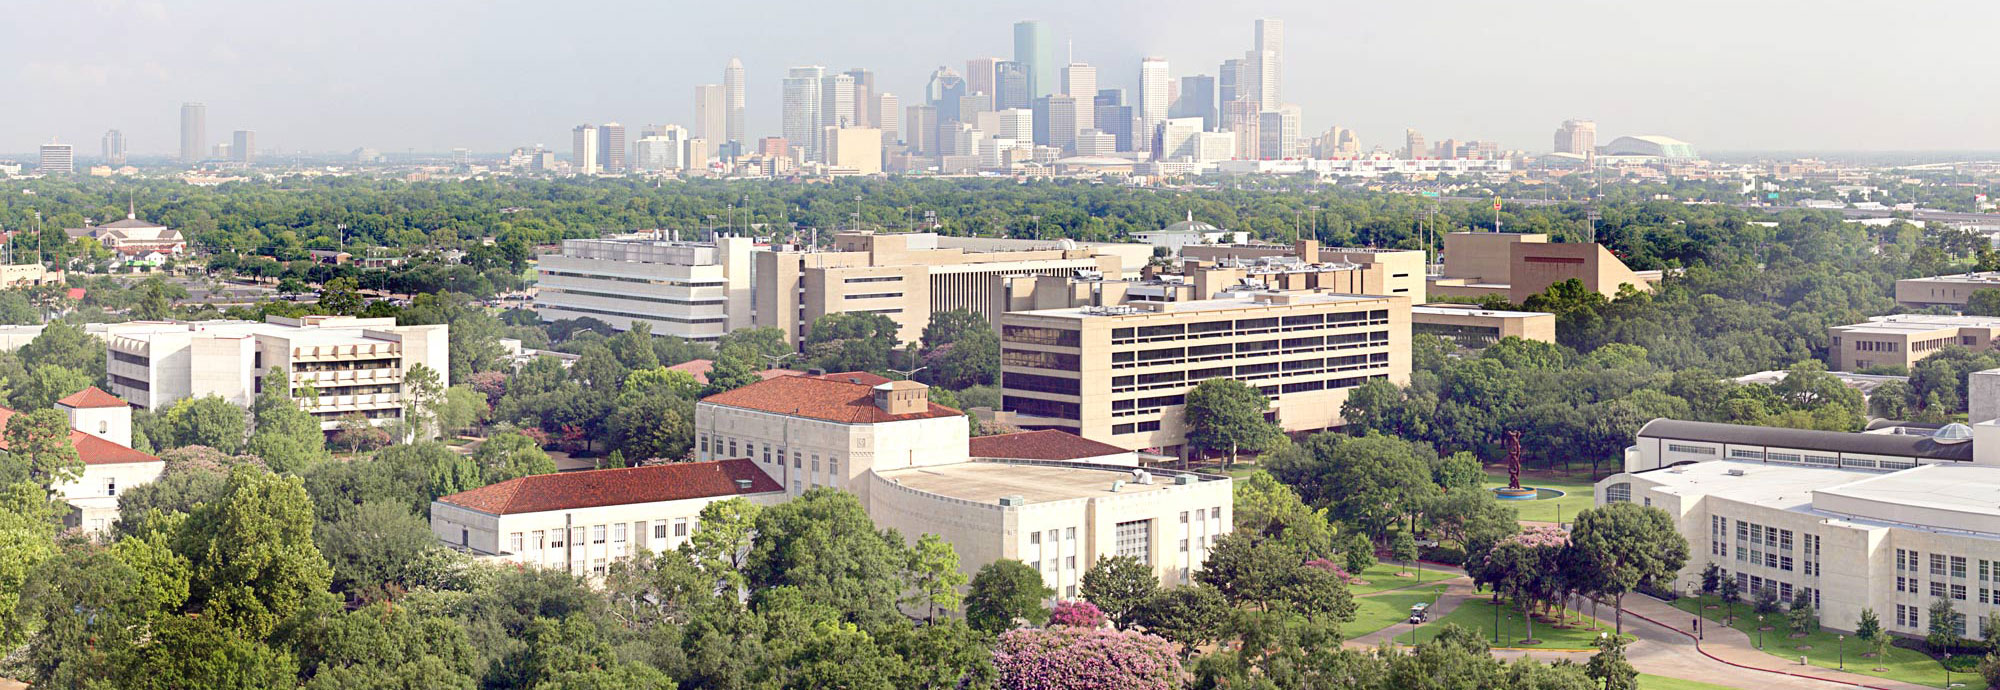 Aerial view of the UH Campus with Houston Skyline